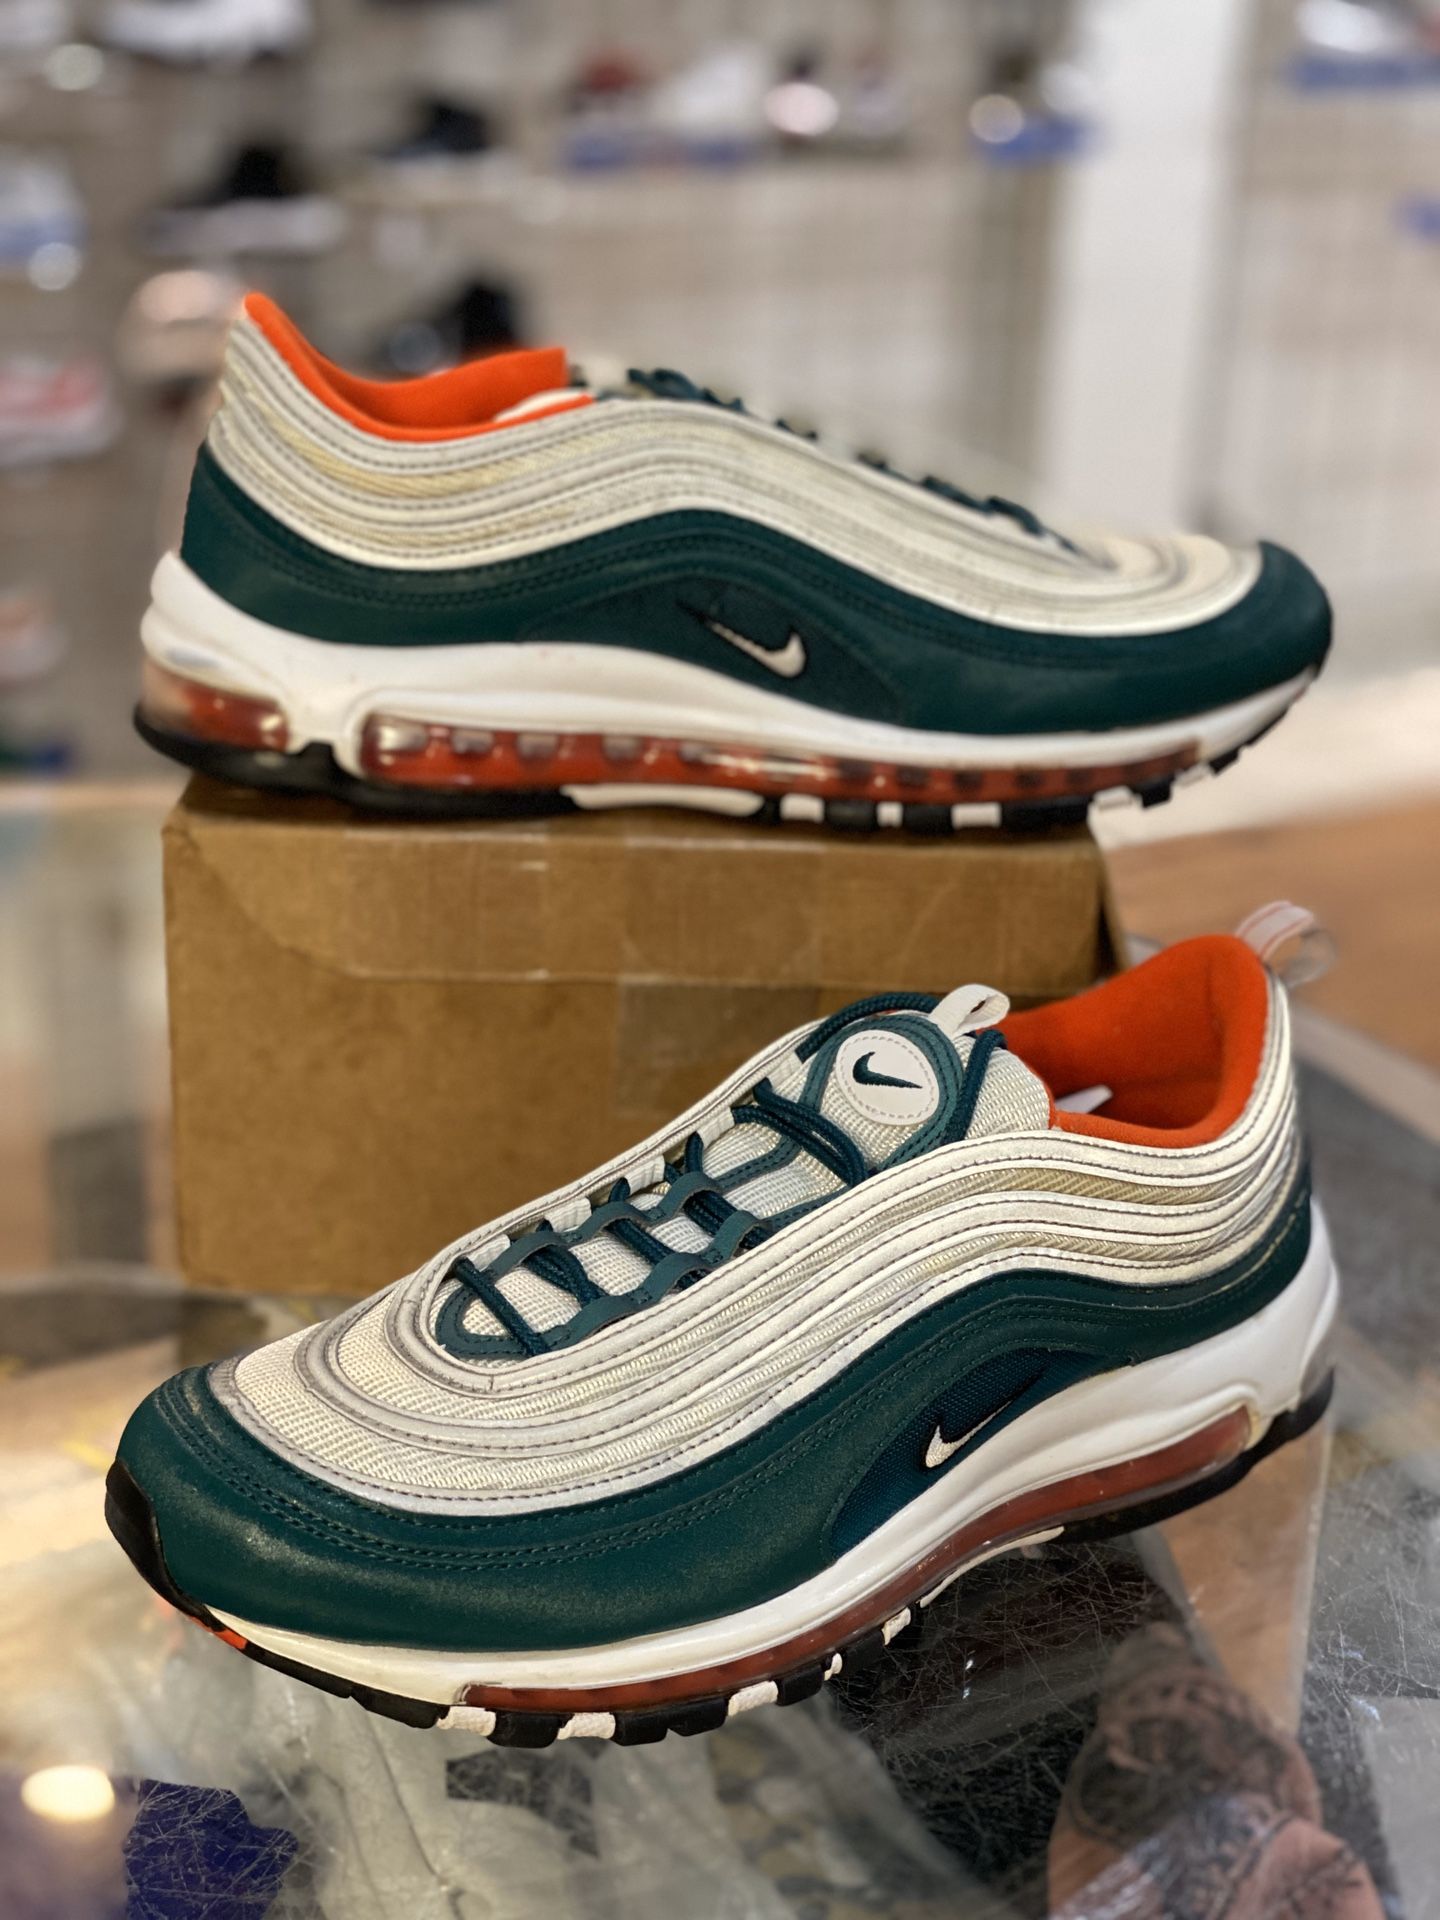 Miami Dolphins Air max 97s size 10.5